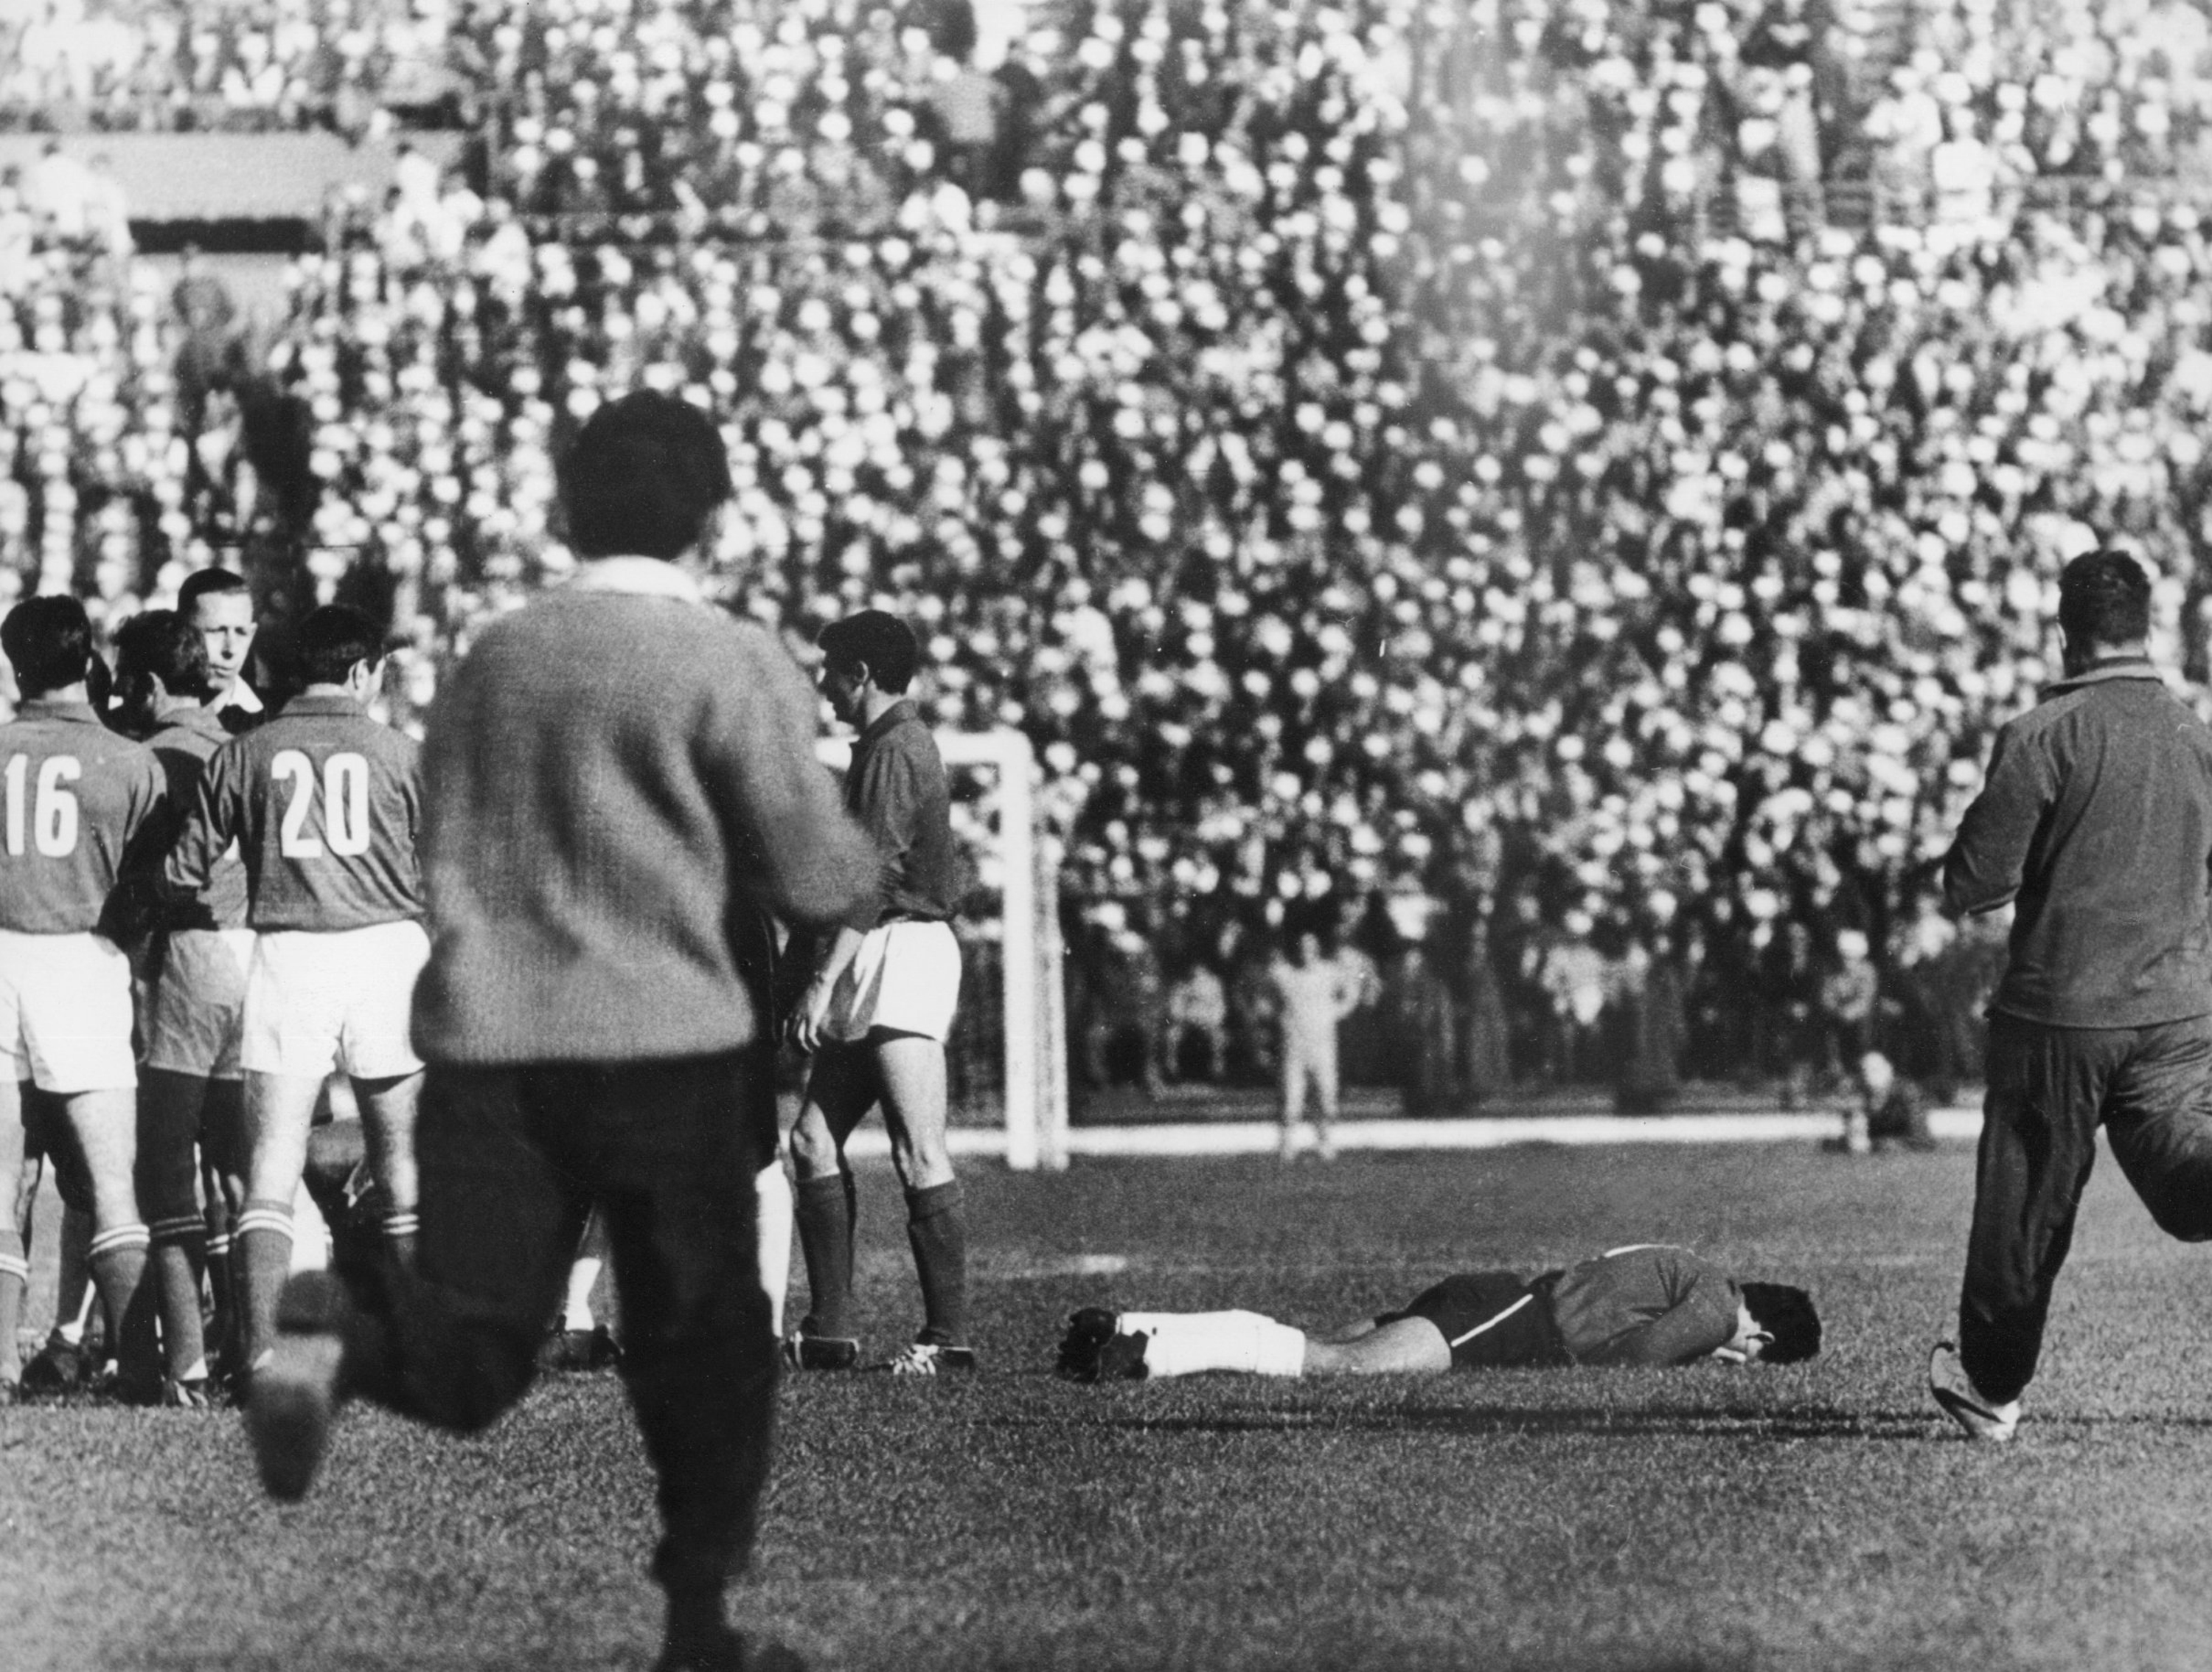 Soccer World Cup 1962: Chile vs. Italy